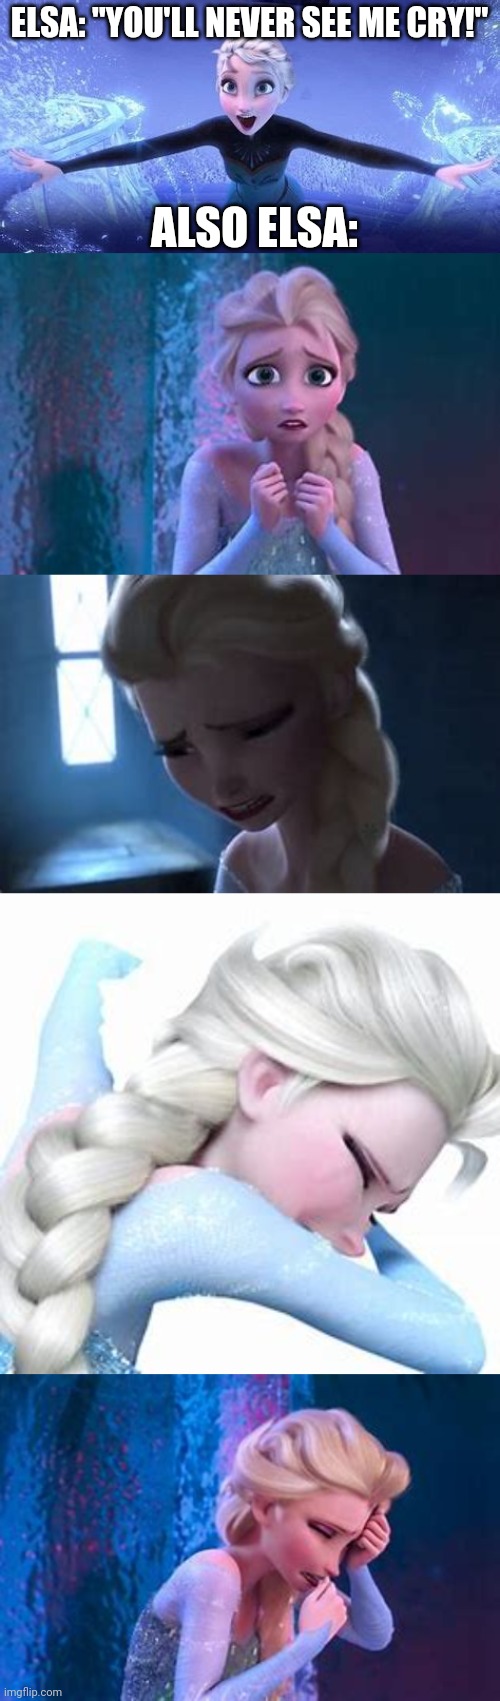 Liar!!! |  ELSA: "YOU'LL NEVER SEE ME CRY!"; ALSO ELSA: | image tagged in frozen,elsa,elsa frozen,liar | made w/ Imgflip meme maker